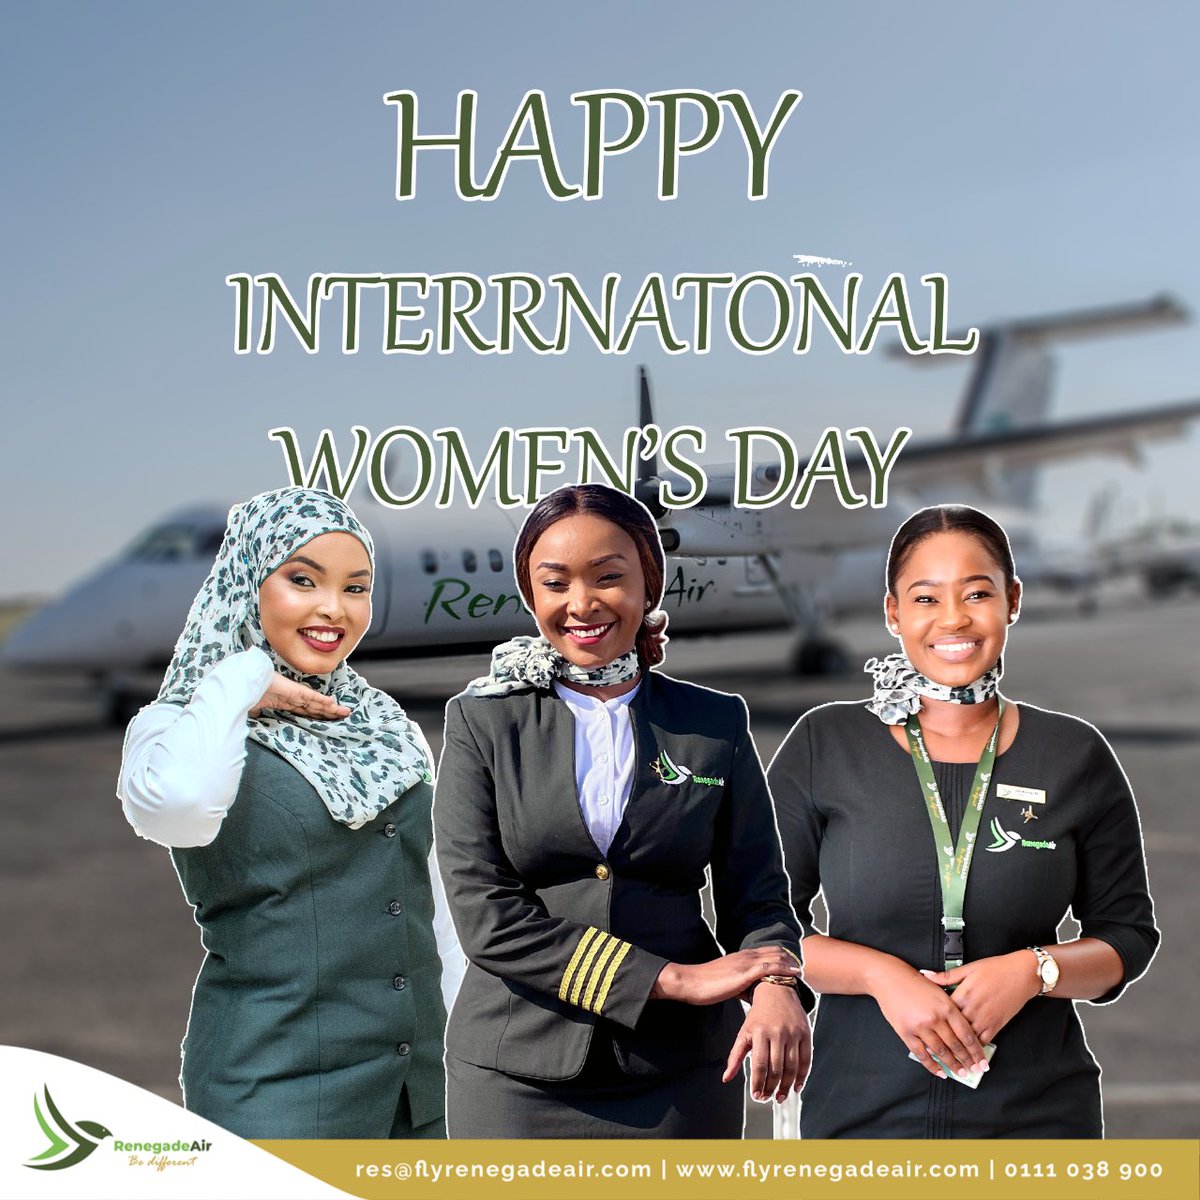 Wishing you a Happy International Women's Day filled with inspiration, empowerment, and the recognition of all the amazing women who make a difference. #flyrenegaeair #bedifferent #InternationalWomensDay #WomensDay #flyrenegadeairexperince #WomenInAviation